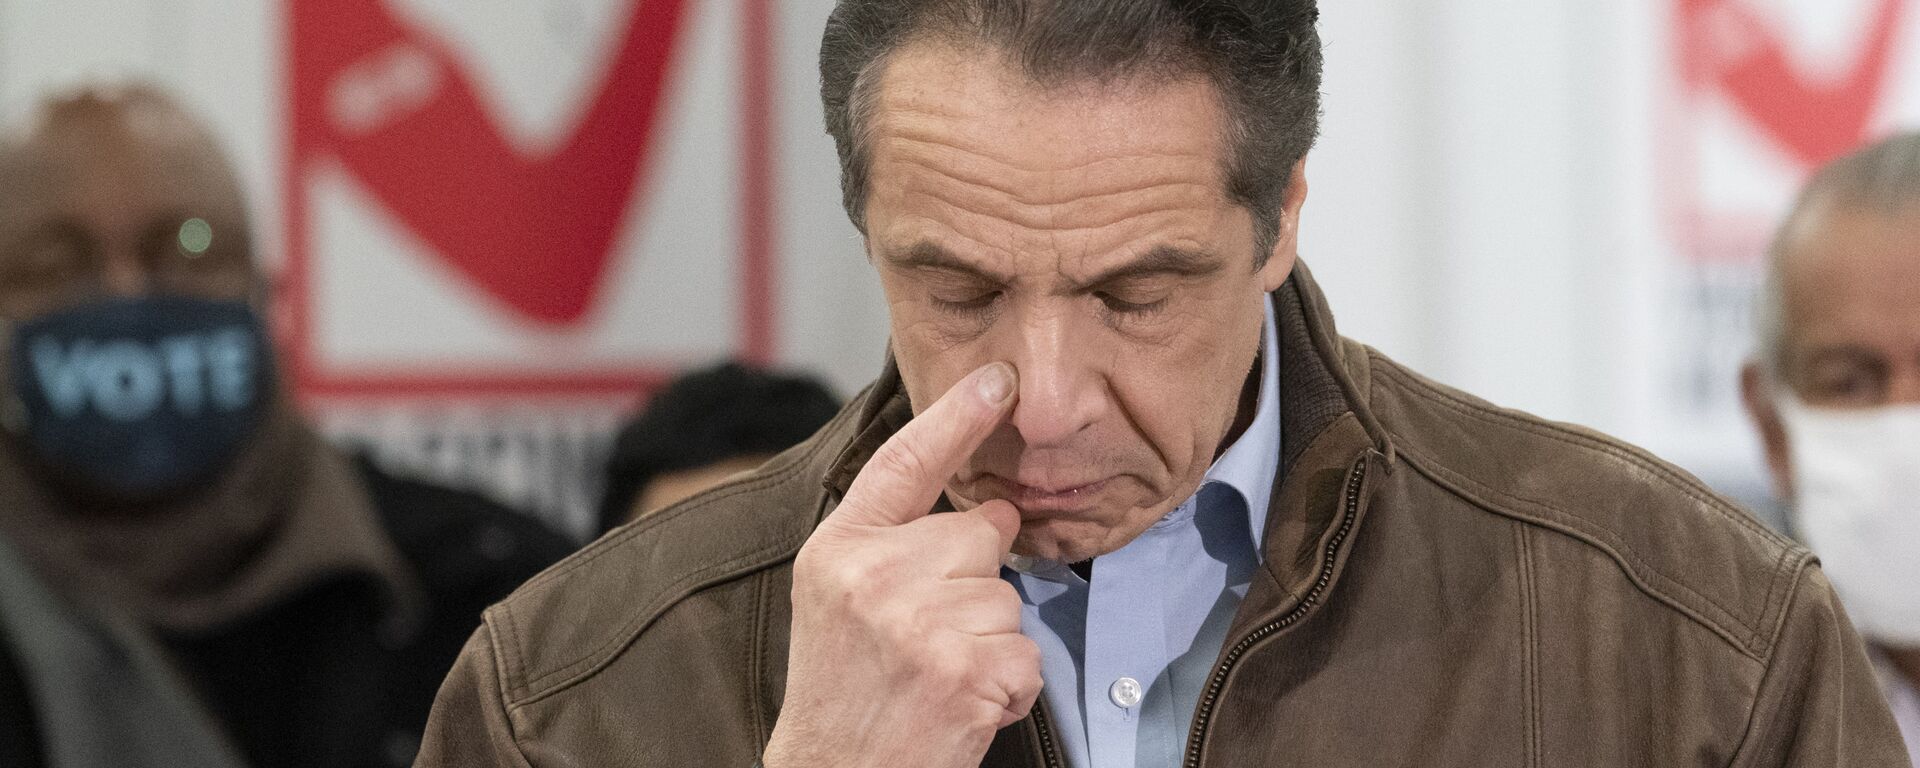 New York Gov. Andrew Cuomo touches his nose during a visit to a new COVID-19 vaccination site, Monday, 15 March 2021, at the State University of New York in Old Westbury. The site is scheduled to open on Friday.  - Sputnik International, 1920, 08.08.2021